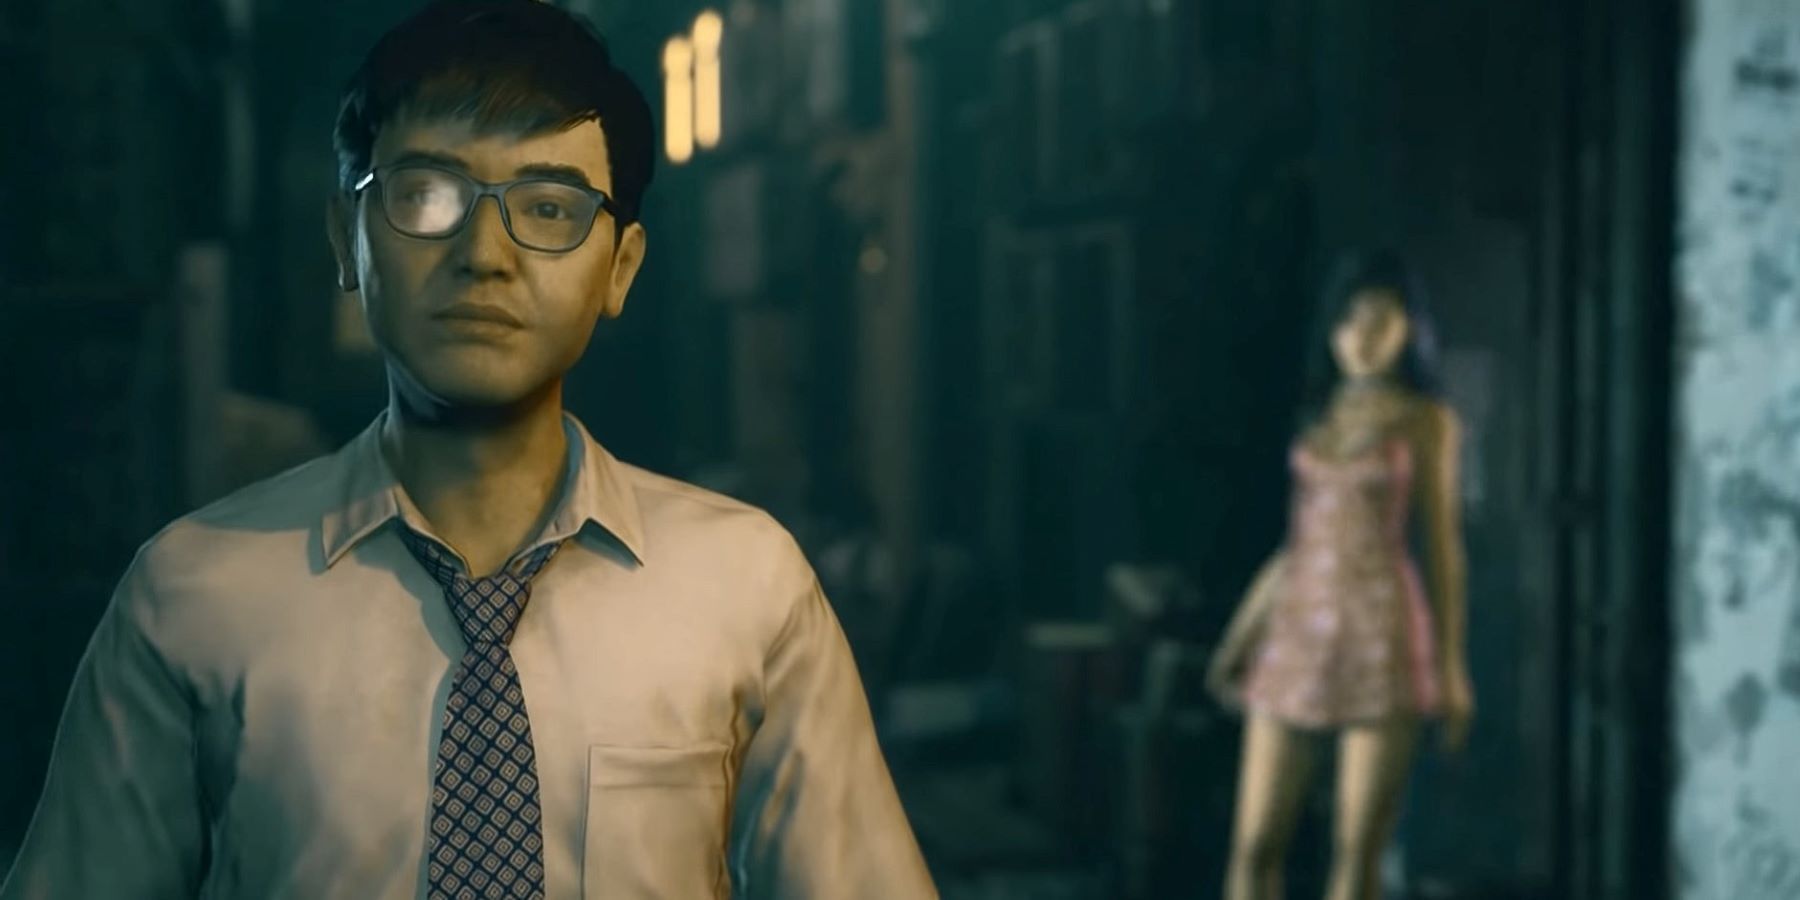 A man in a tie walking down an alleyway with a woman in the background in the reveal trailer for Bokeh Game Studio's Slitterhead